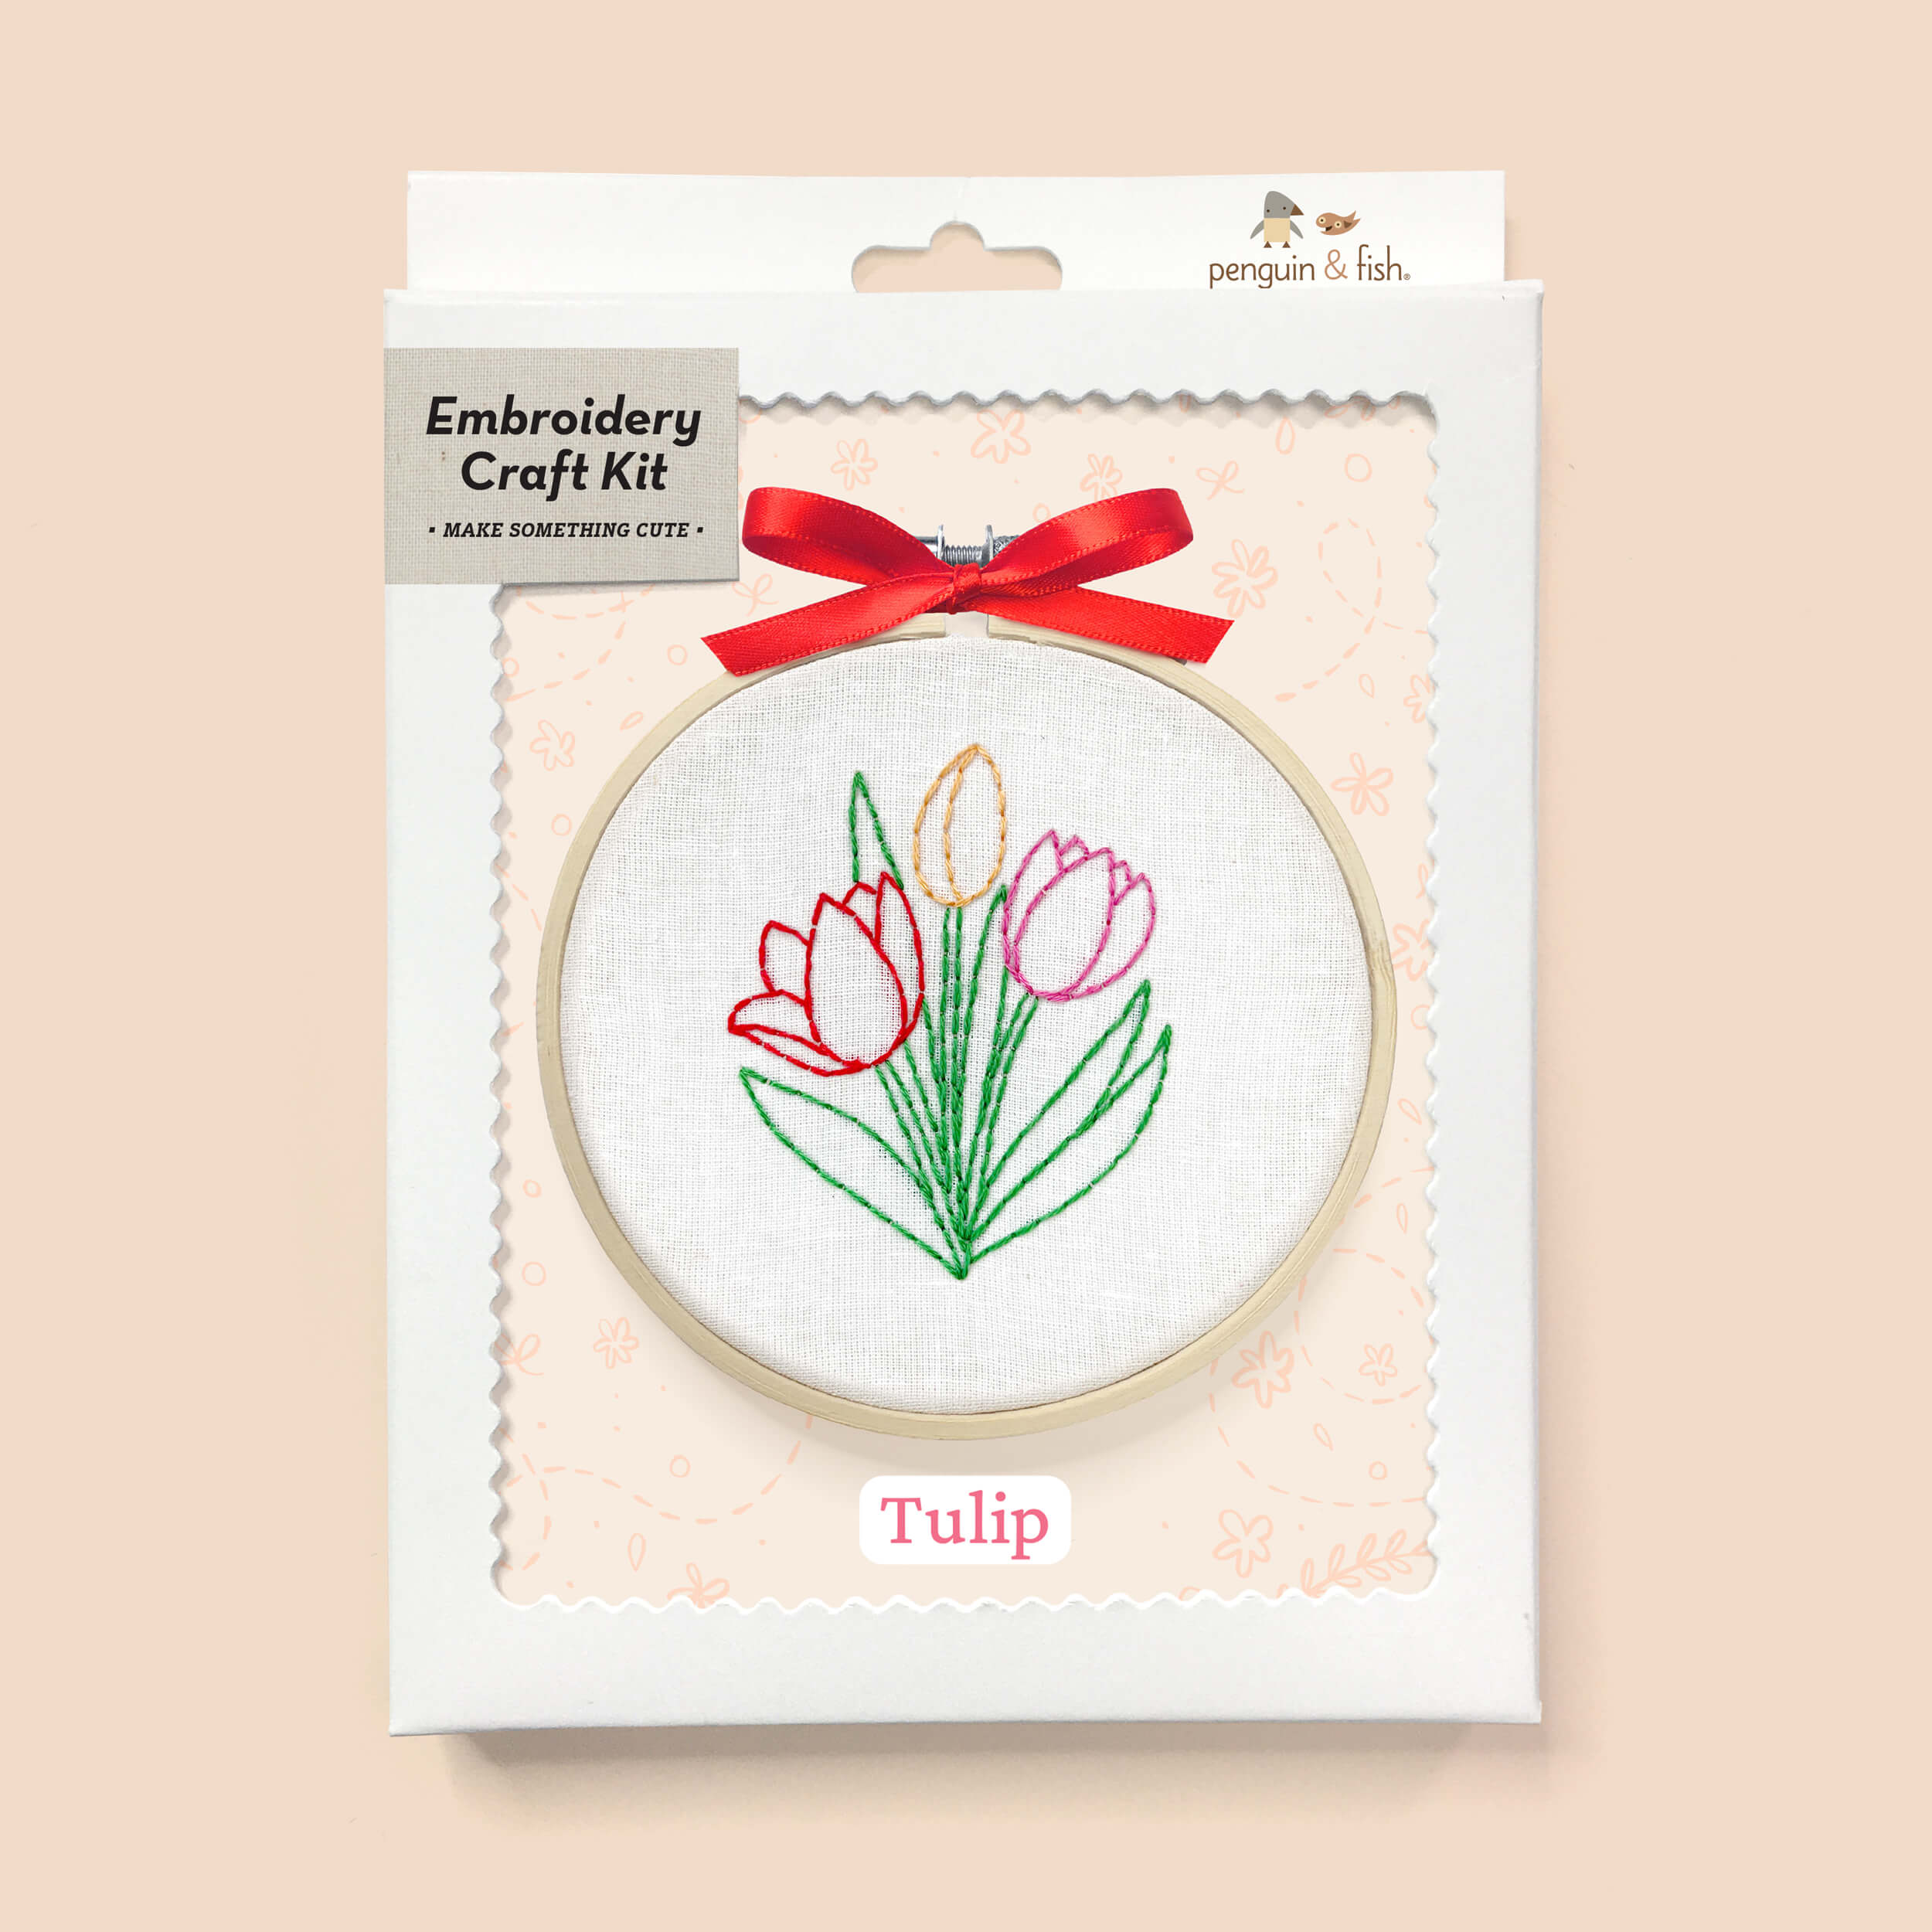 Tulip embroidery supplies kit in a box